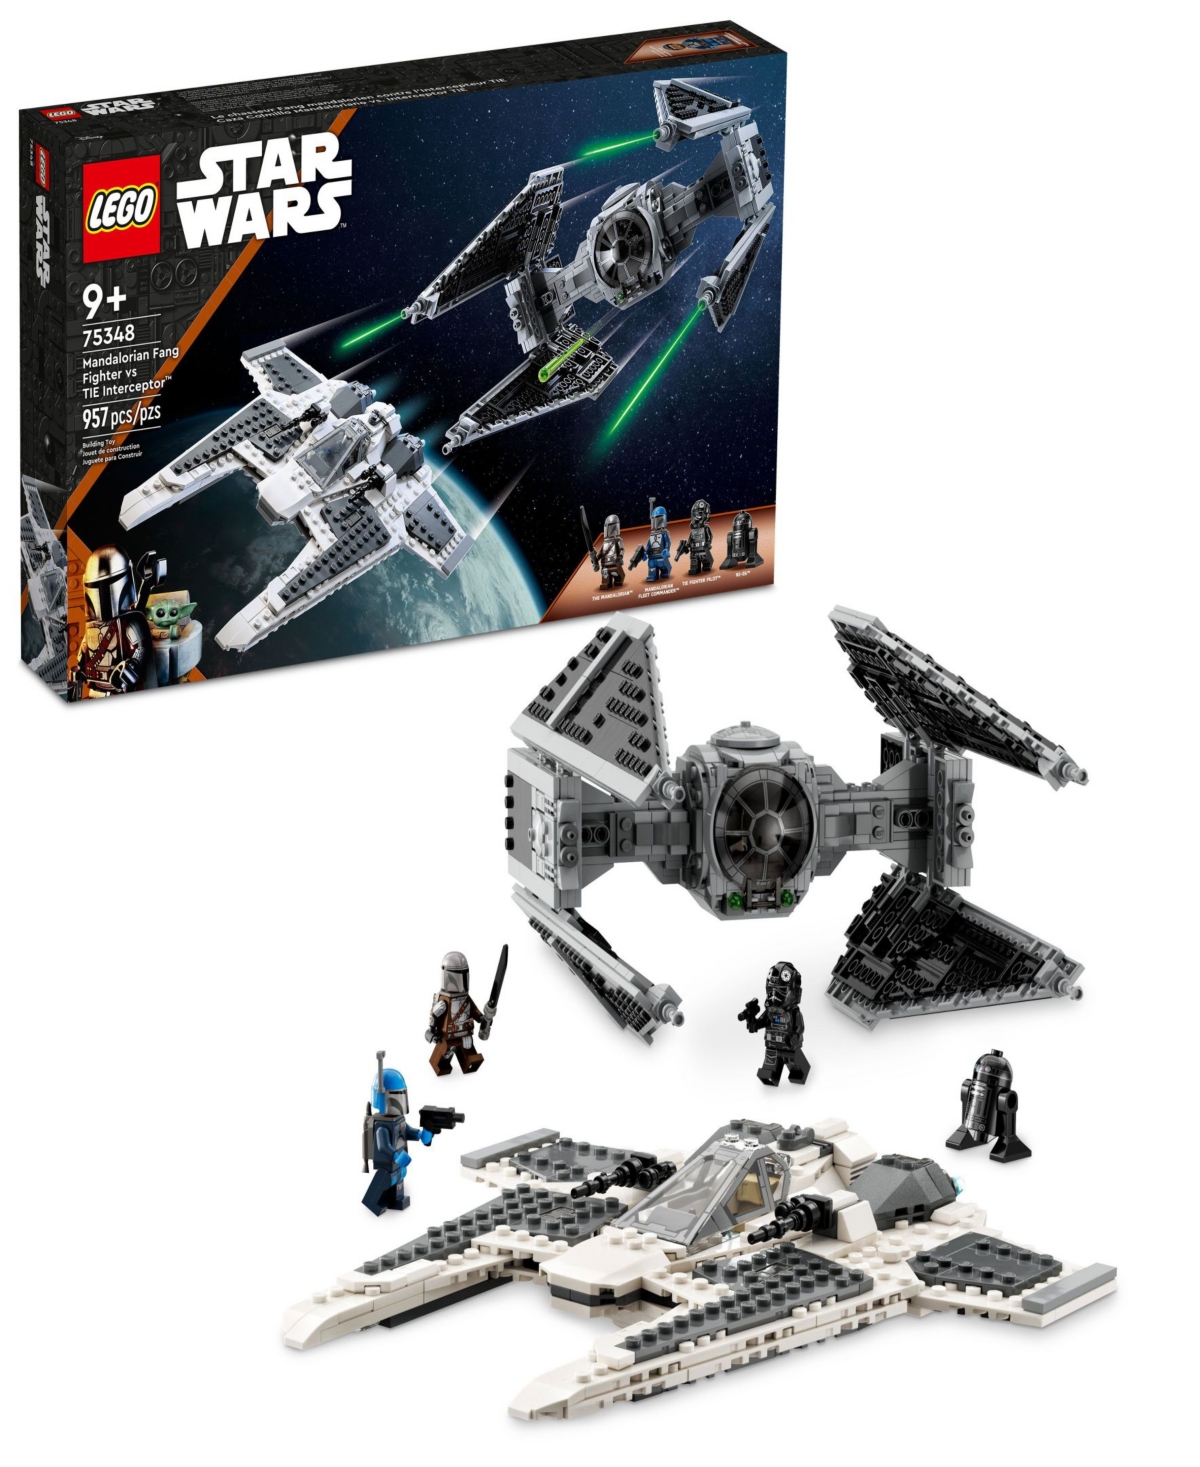 Lego Kids' Star Wars 75348 Mandalorian Fang Fighter Vs. Tie Interceptor Toy Building Set With The Mandalorian, In Multicolor